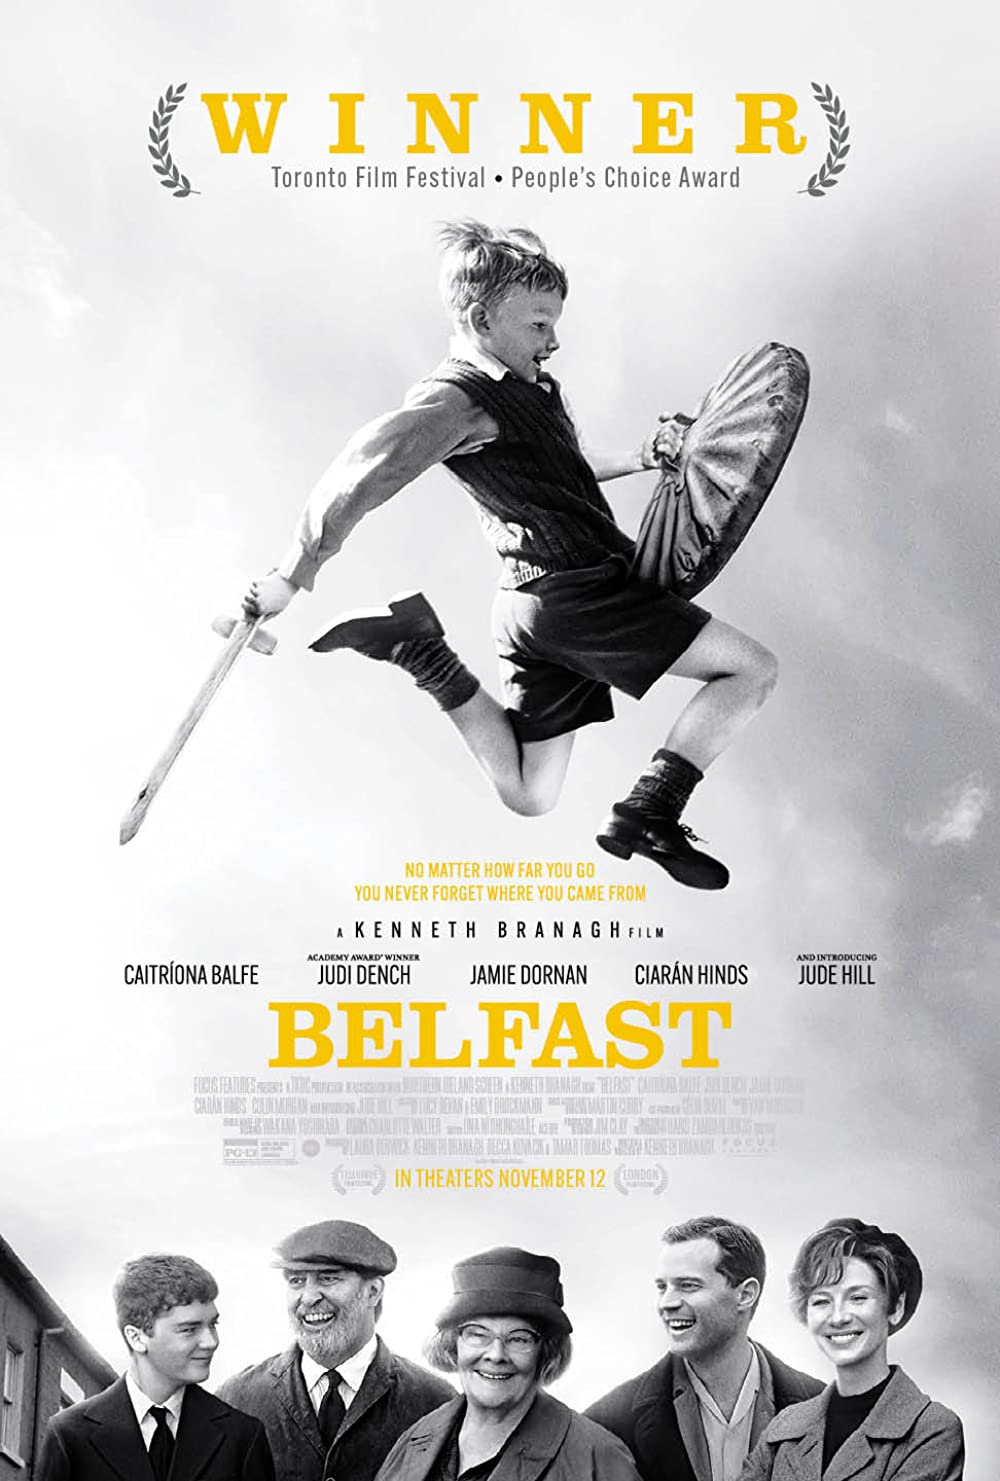 Black and white image of movie cover featuring a young boy leaping with a pretend sword and shield. At the bottom of the picture there are 5 people of varying ages smiling.